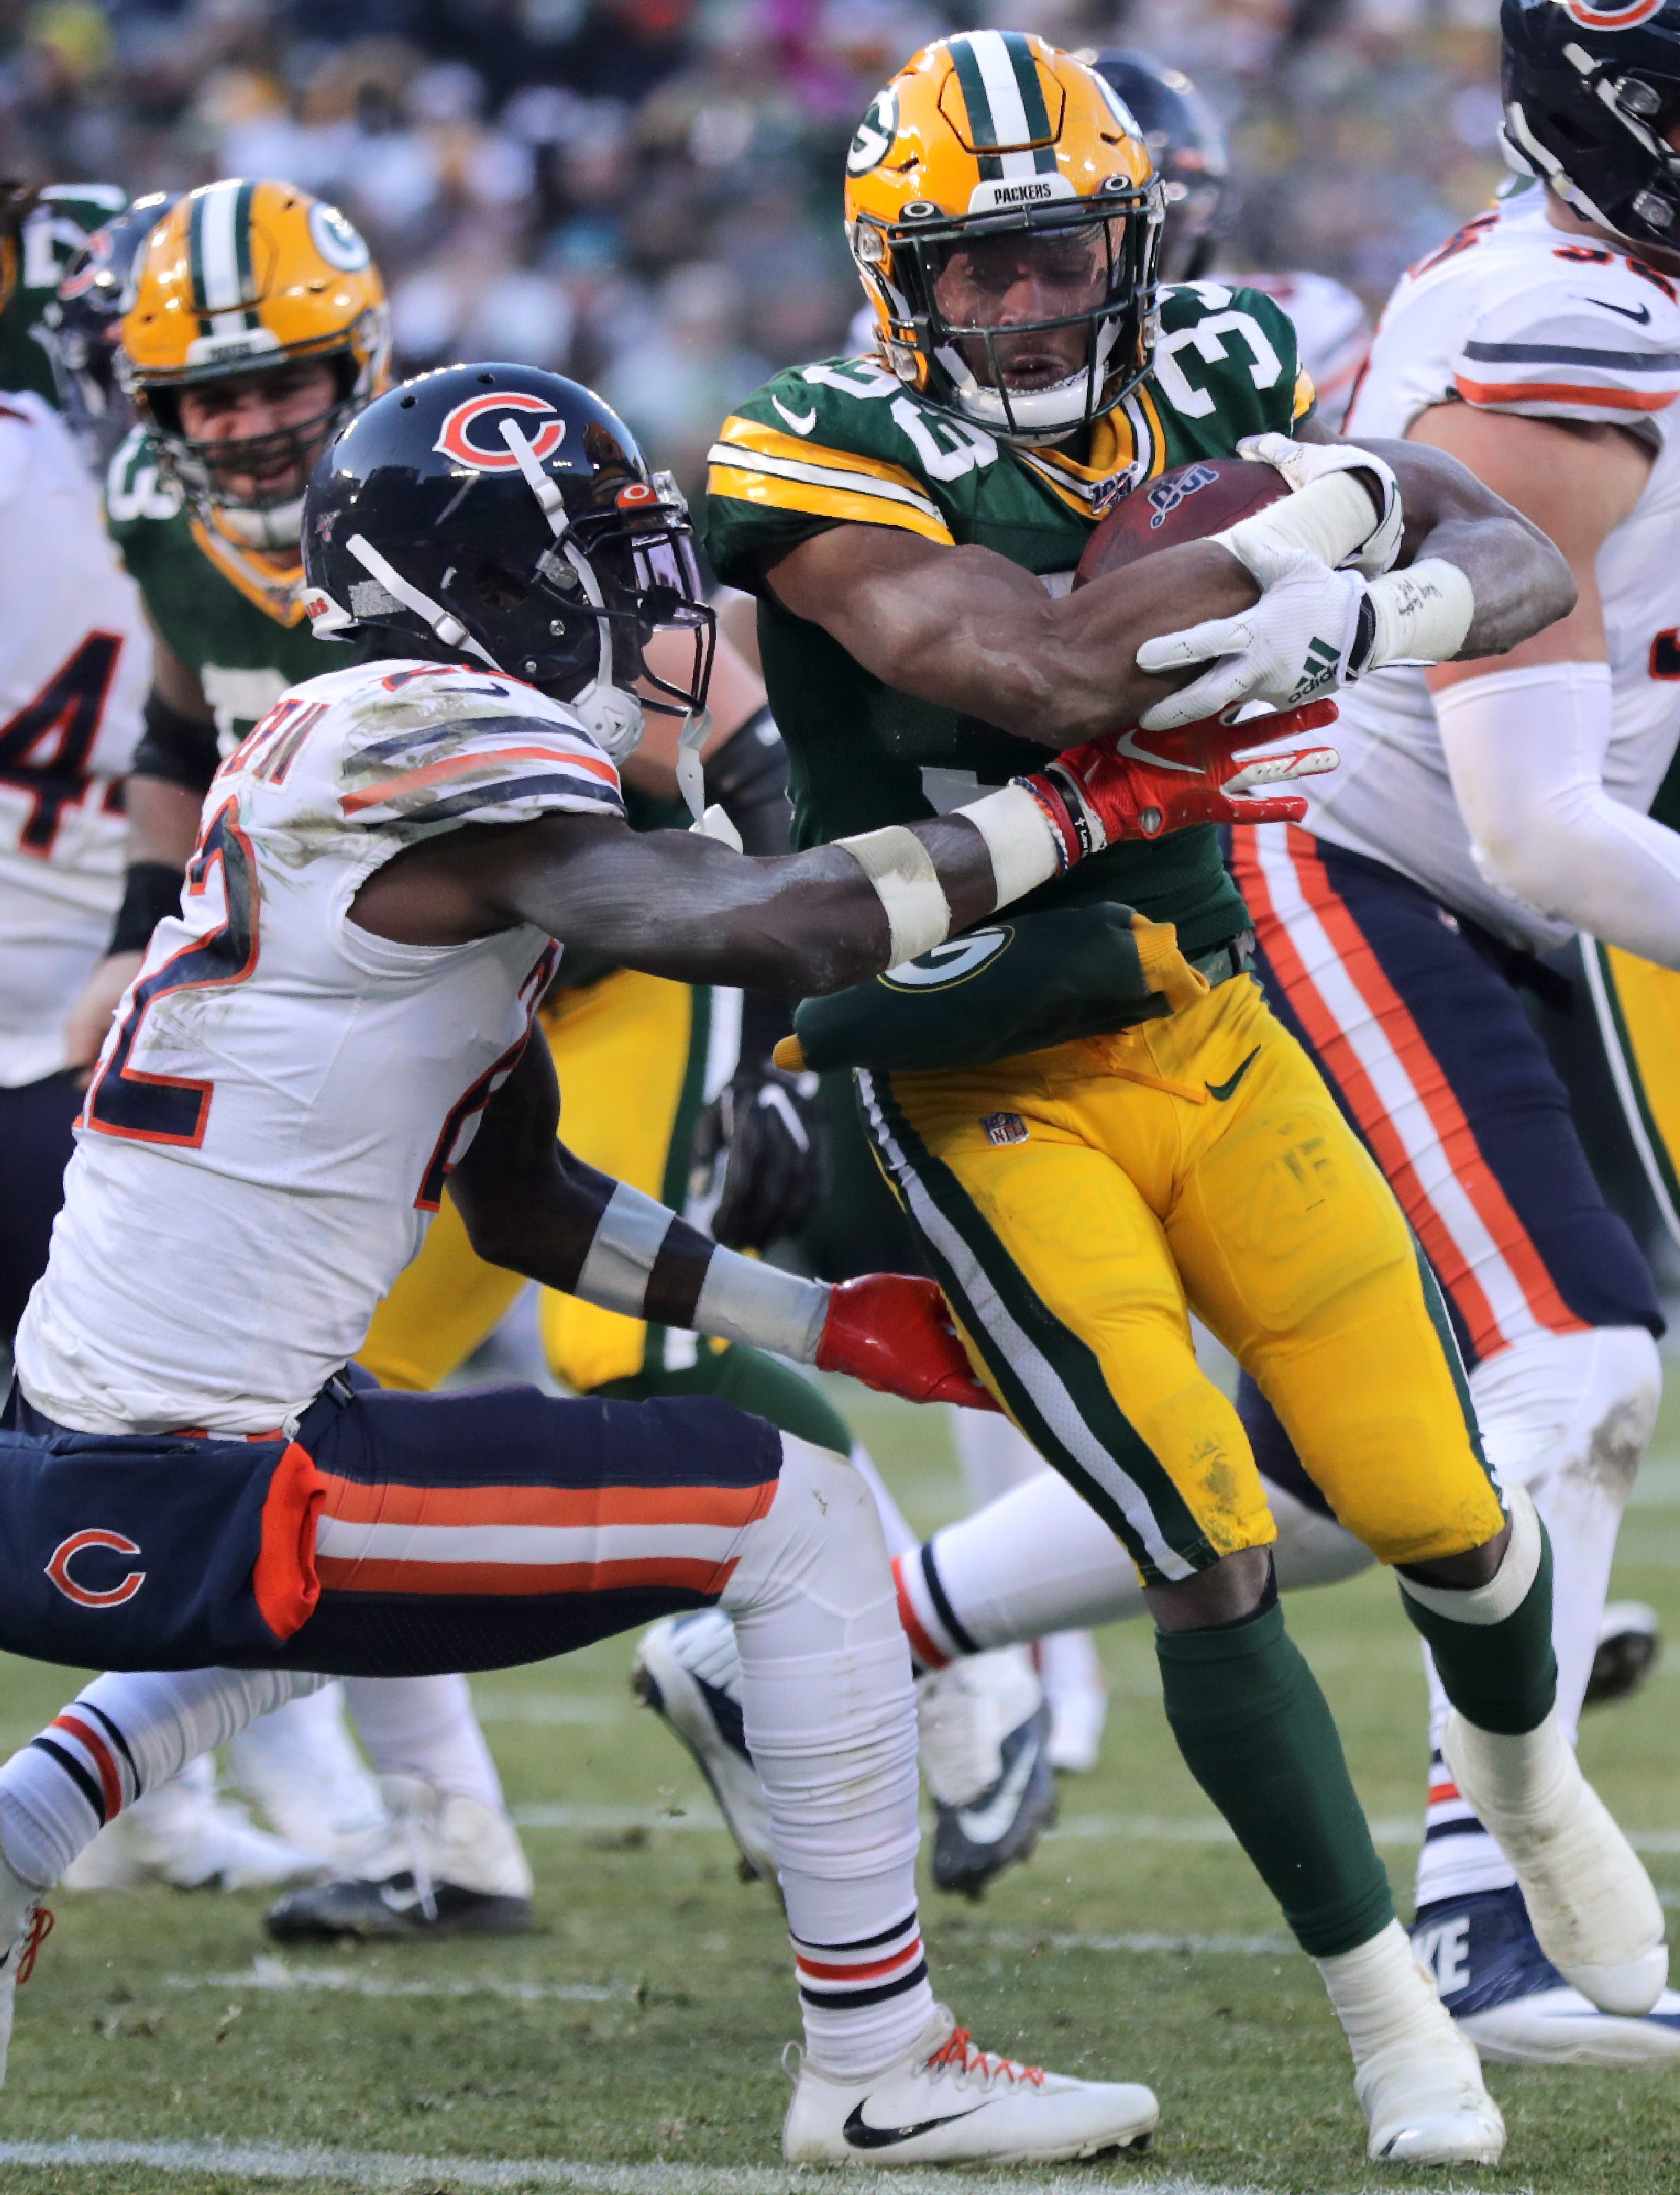 Green Bay Packers against the Chicago Bears during their football game on Sunday, December 15, 2019, at Lambeau Field in Green Bay, Wis.